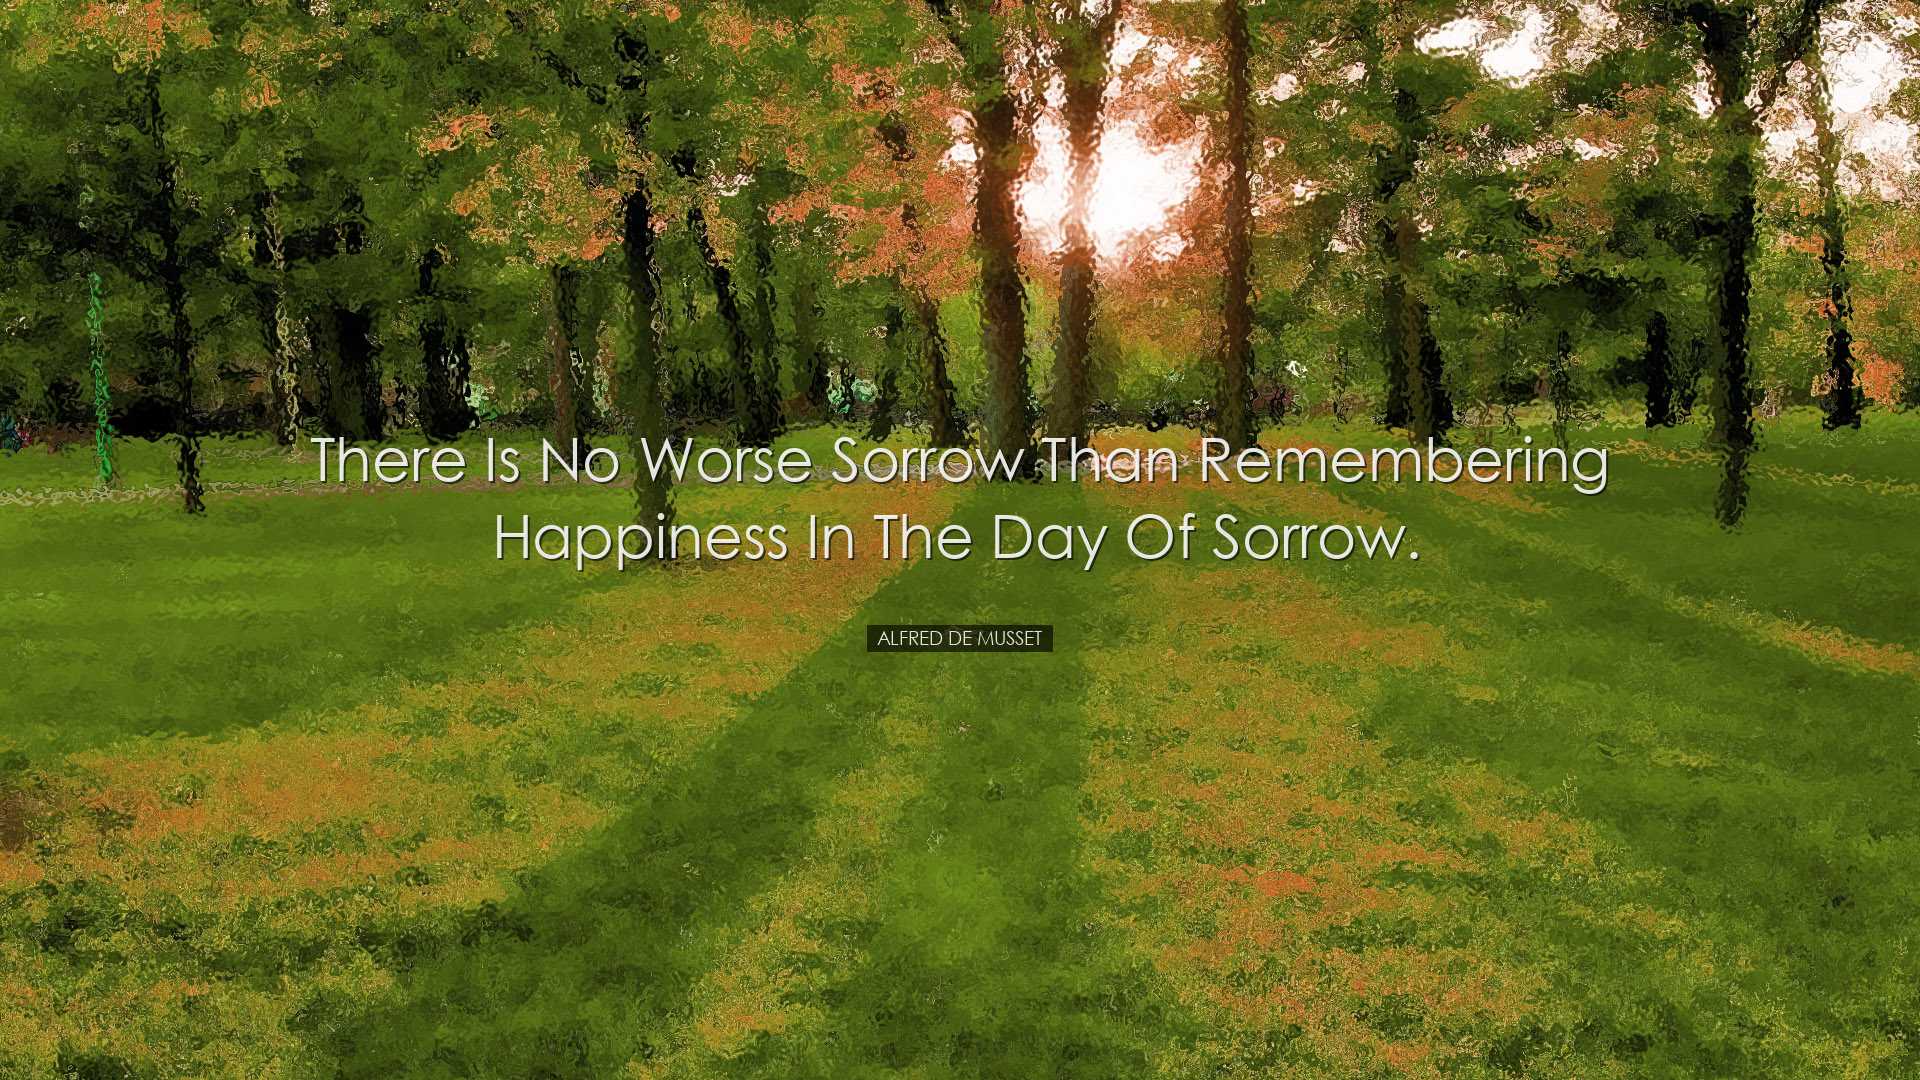 There is no worse sorrow than remembering happiness in the day of